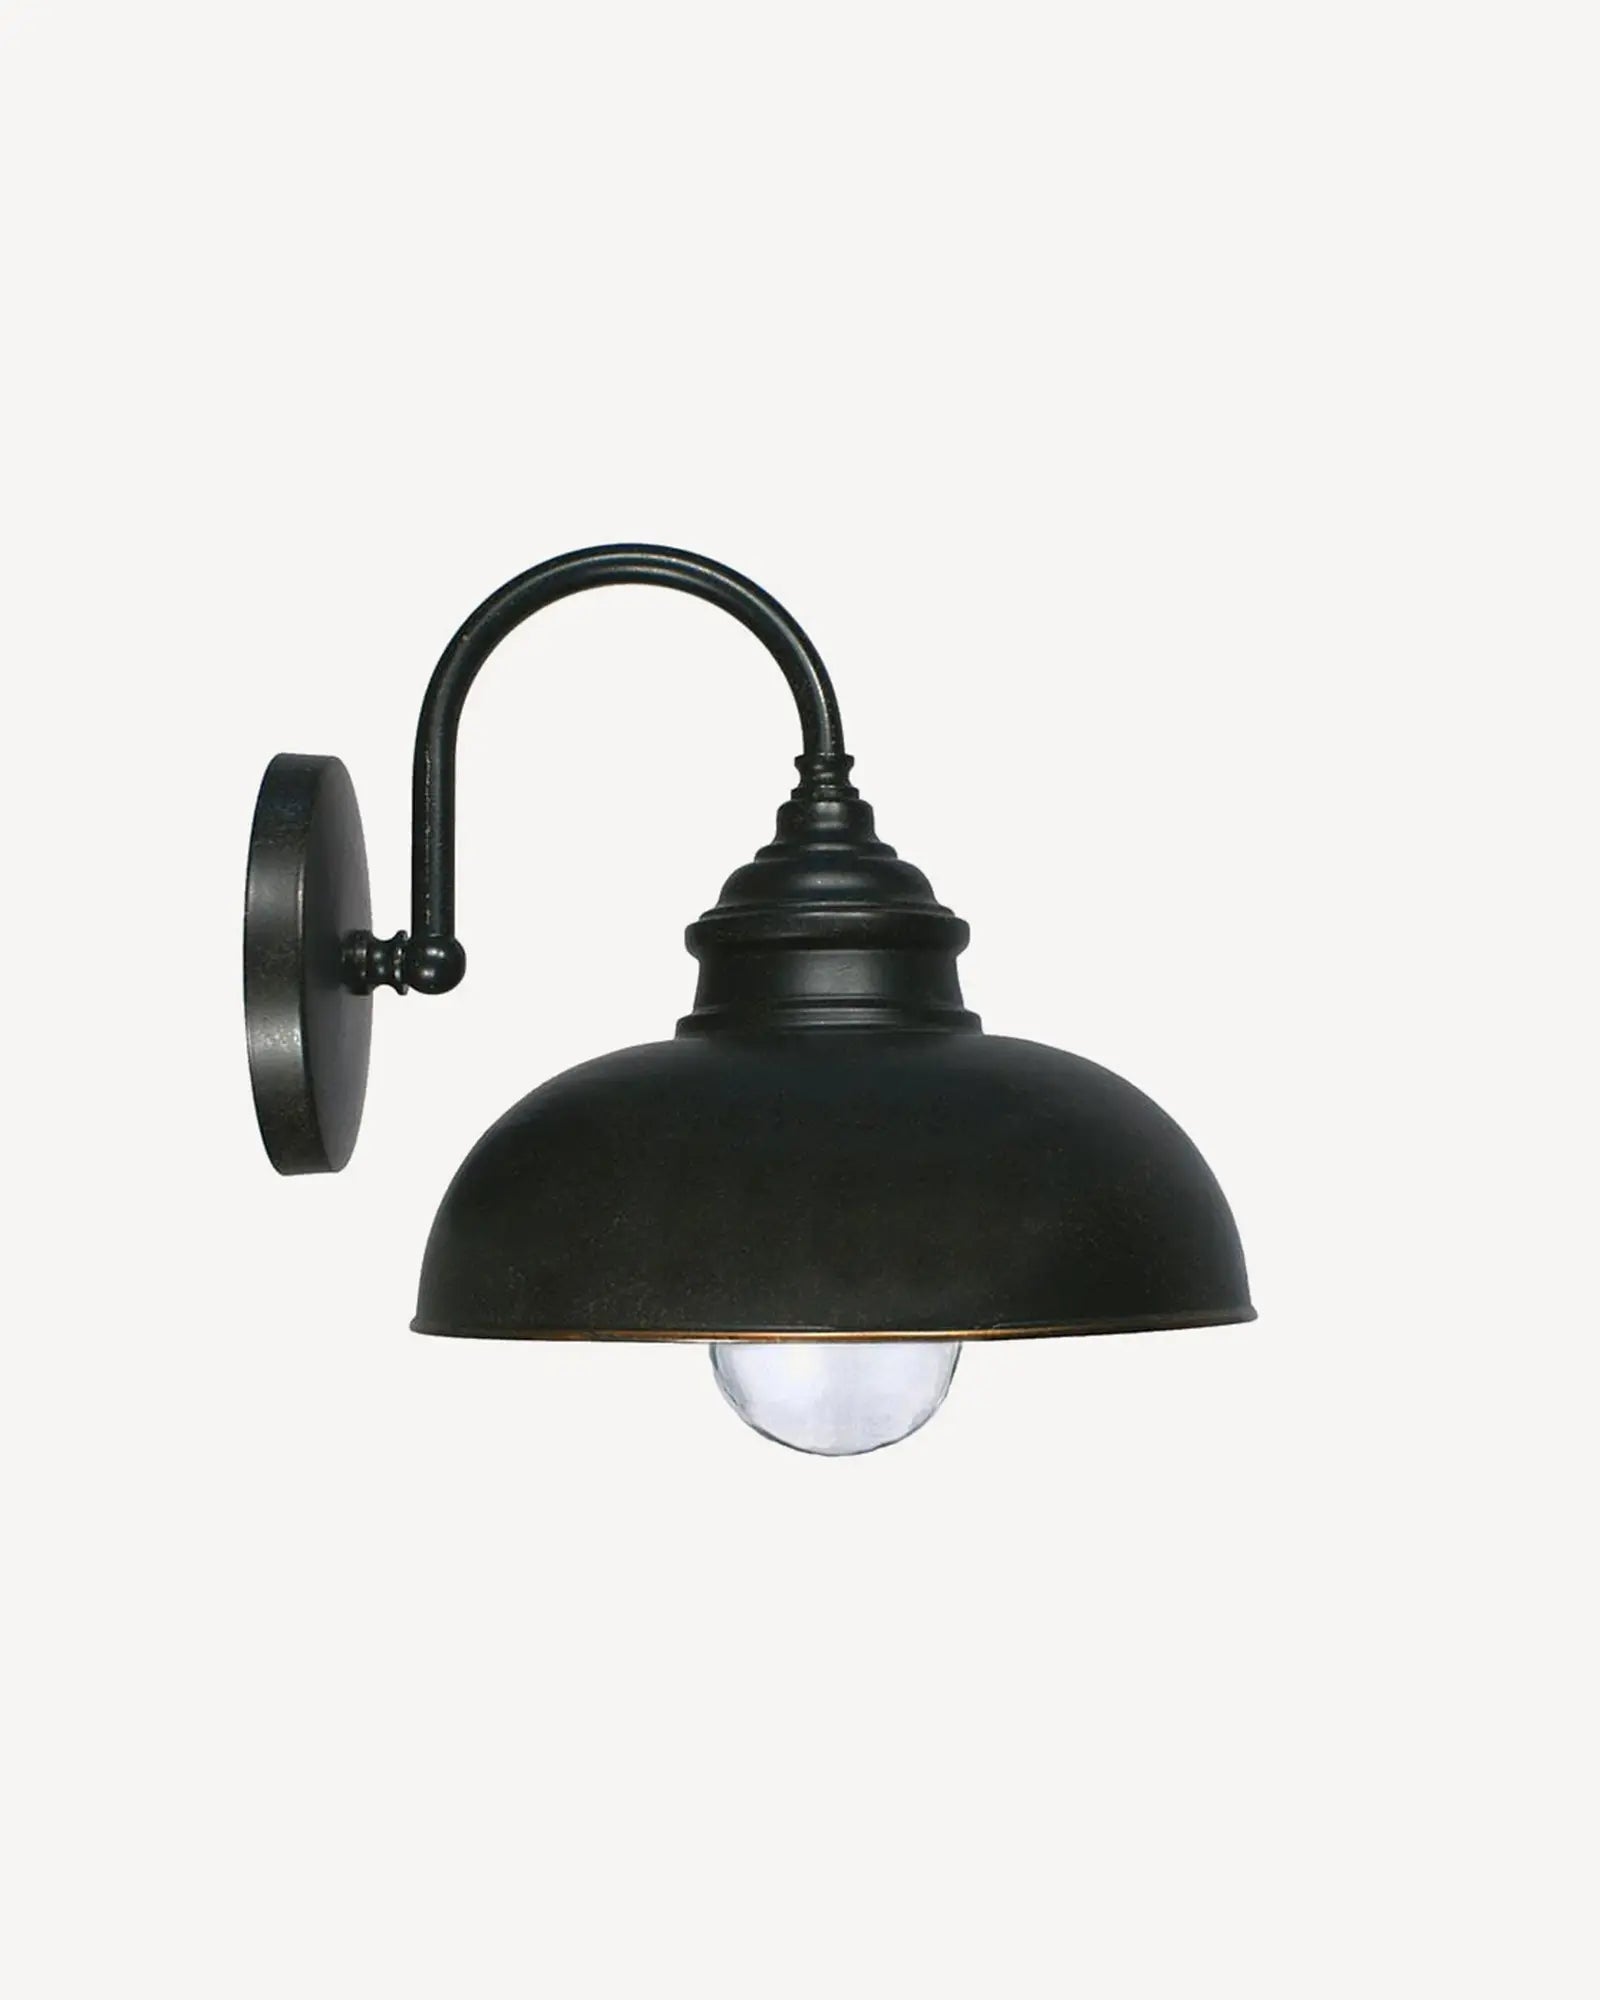 Parkway wall light by Inspiration Light at Nook Collections